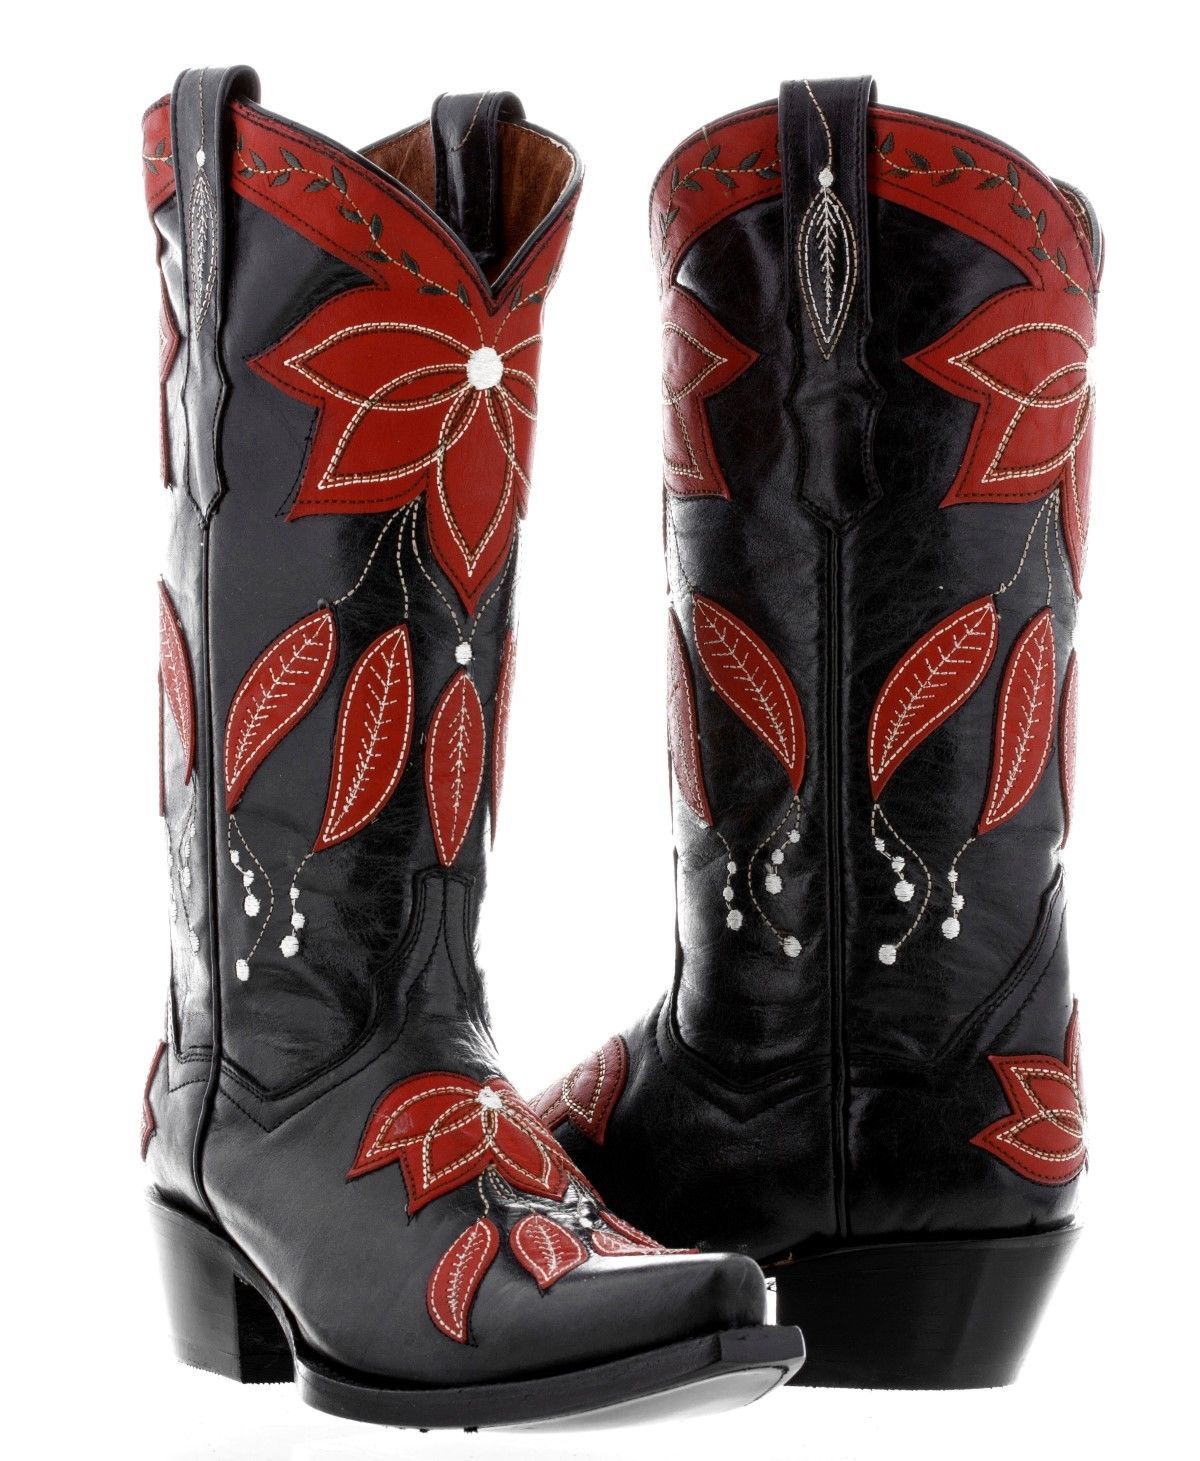 Primary image for Womens Black Leather Cowboy Boots Floral Embroidered Summer Western Snip Toe